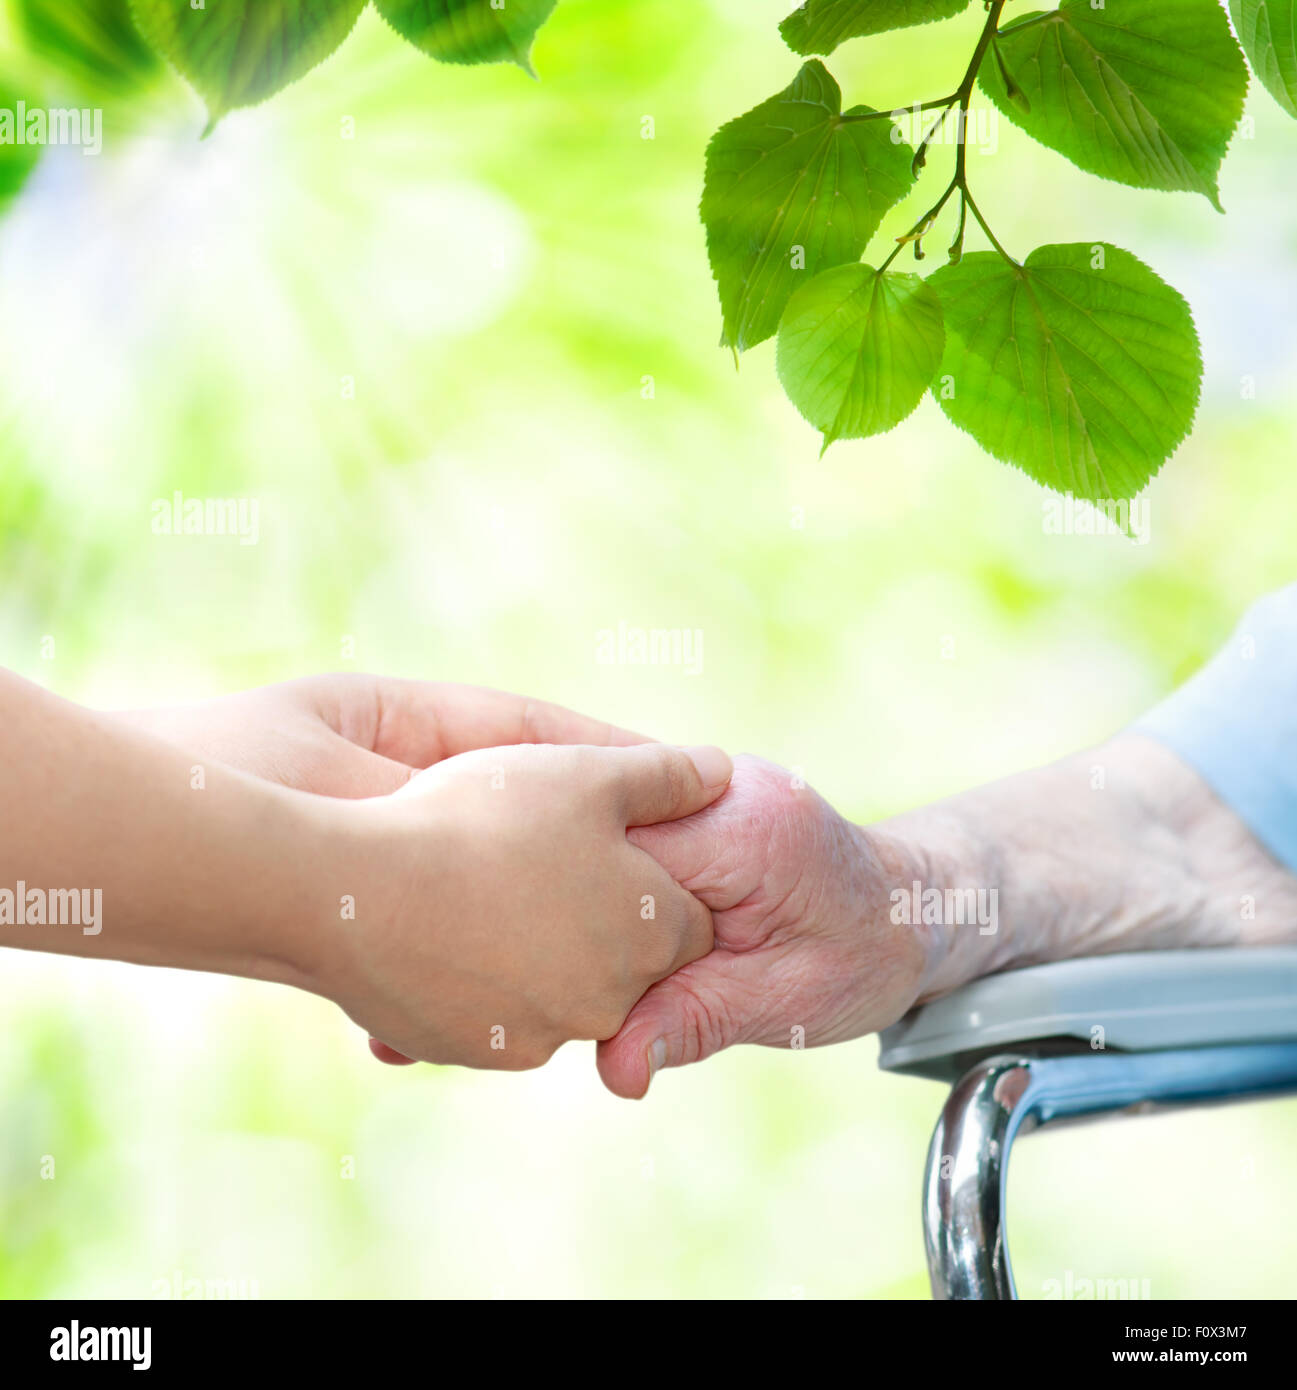 Elderly woman in wheel chair holding hands with young caretaker Stock Photo